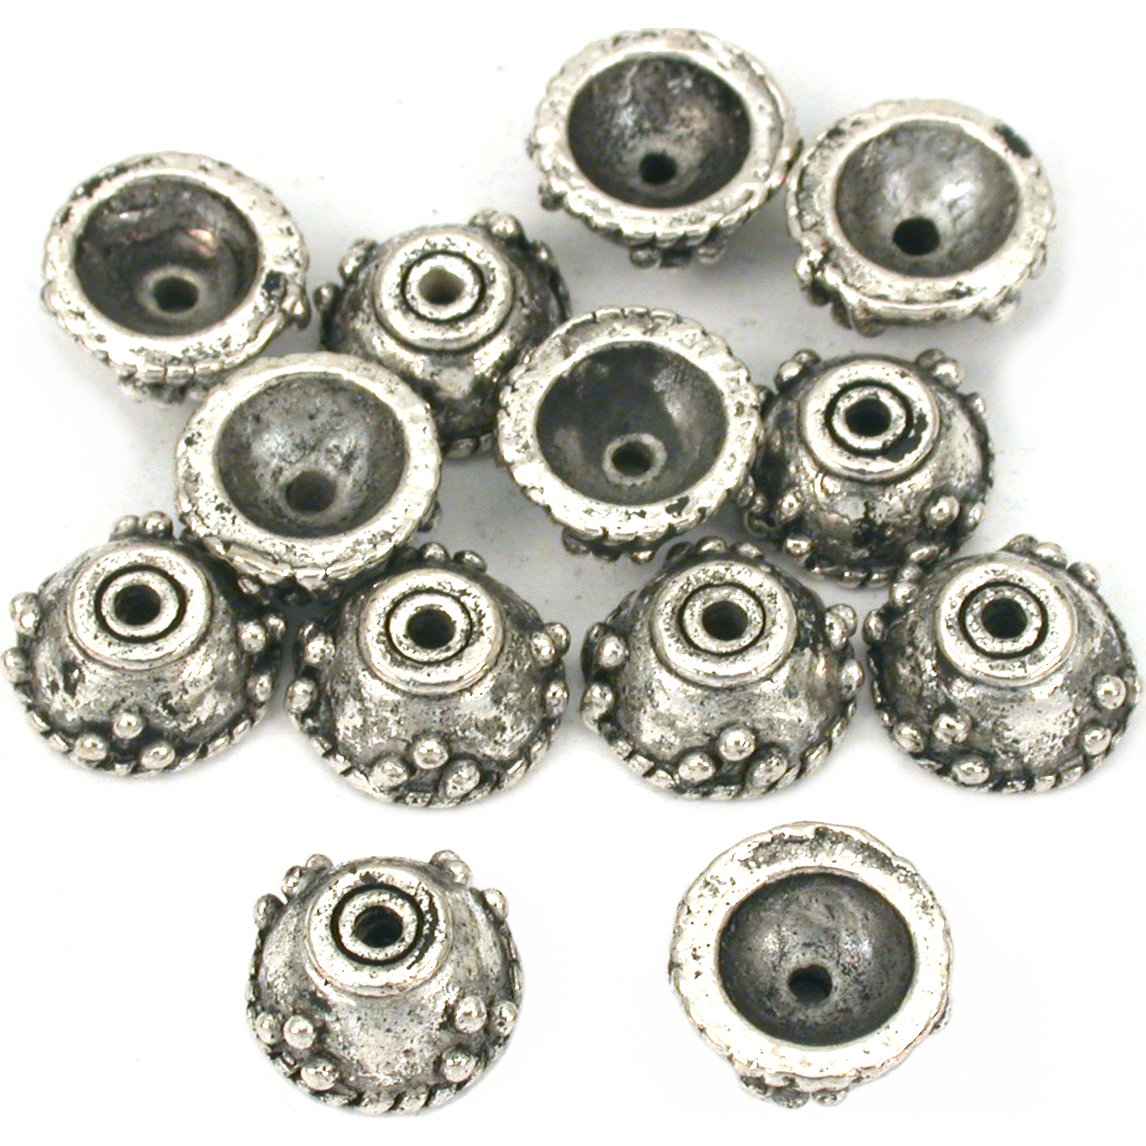 Bali Bead Caps Rope Antique Silver Plated 9.5mm 12Pcs Approx.